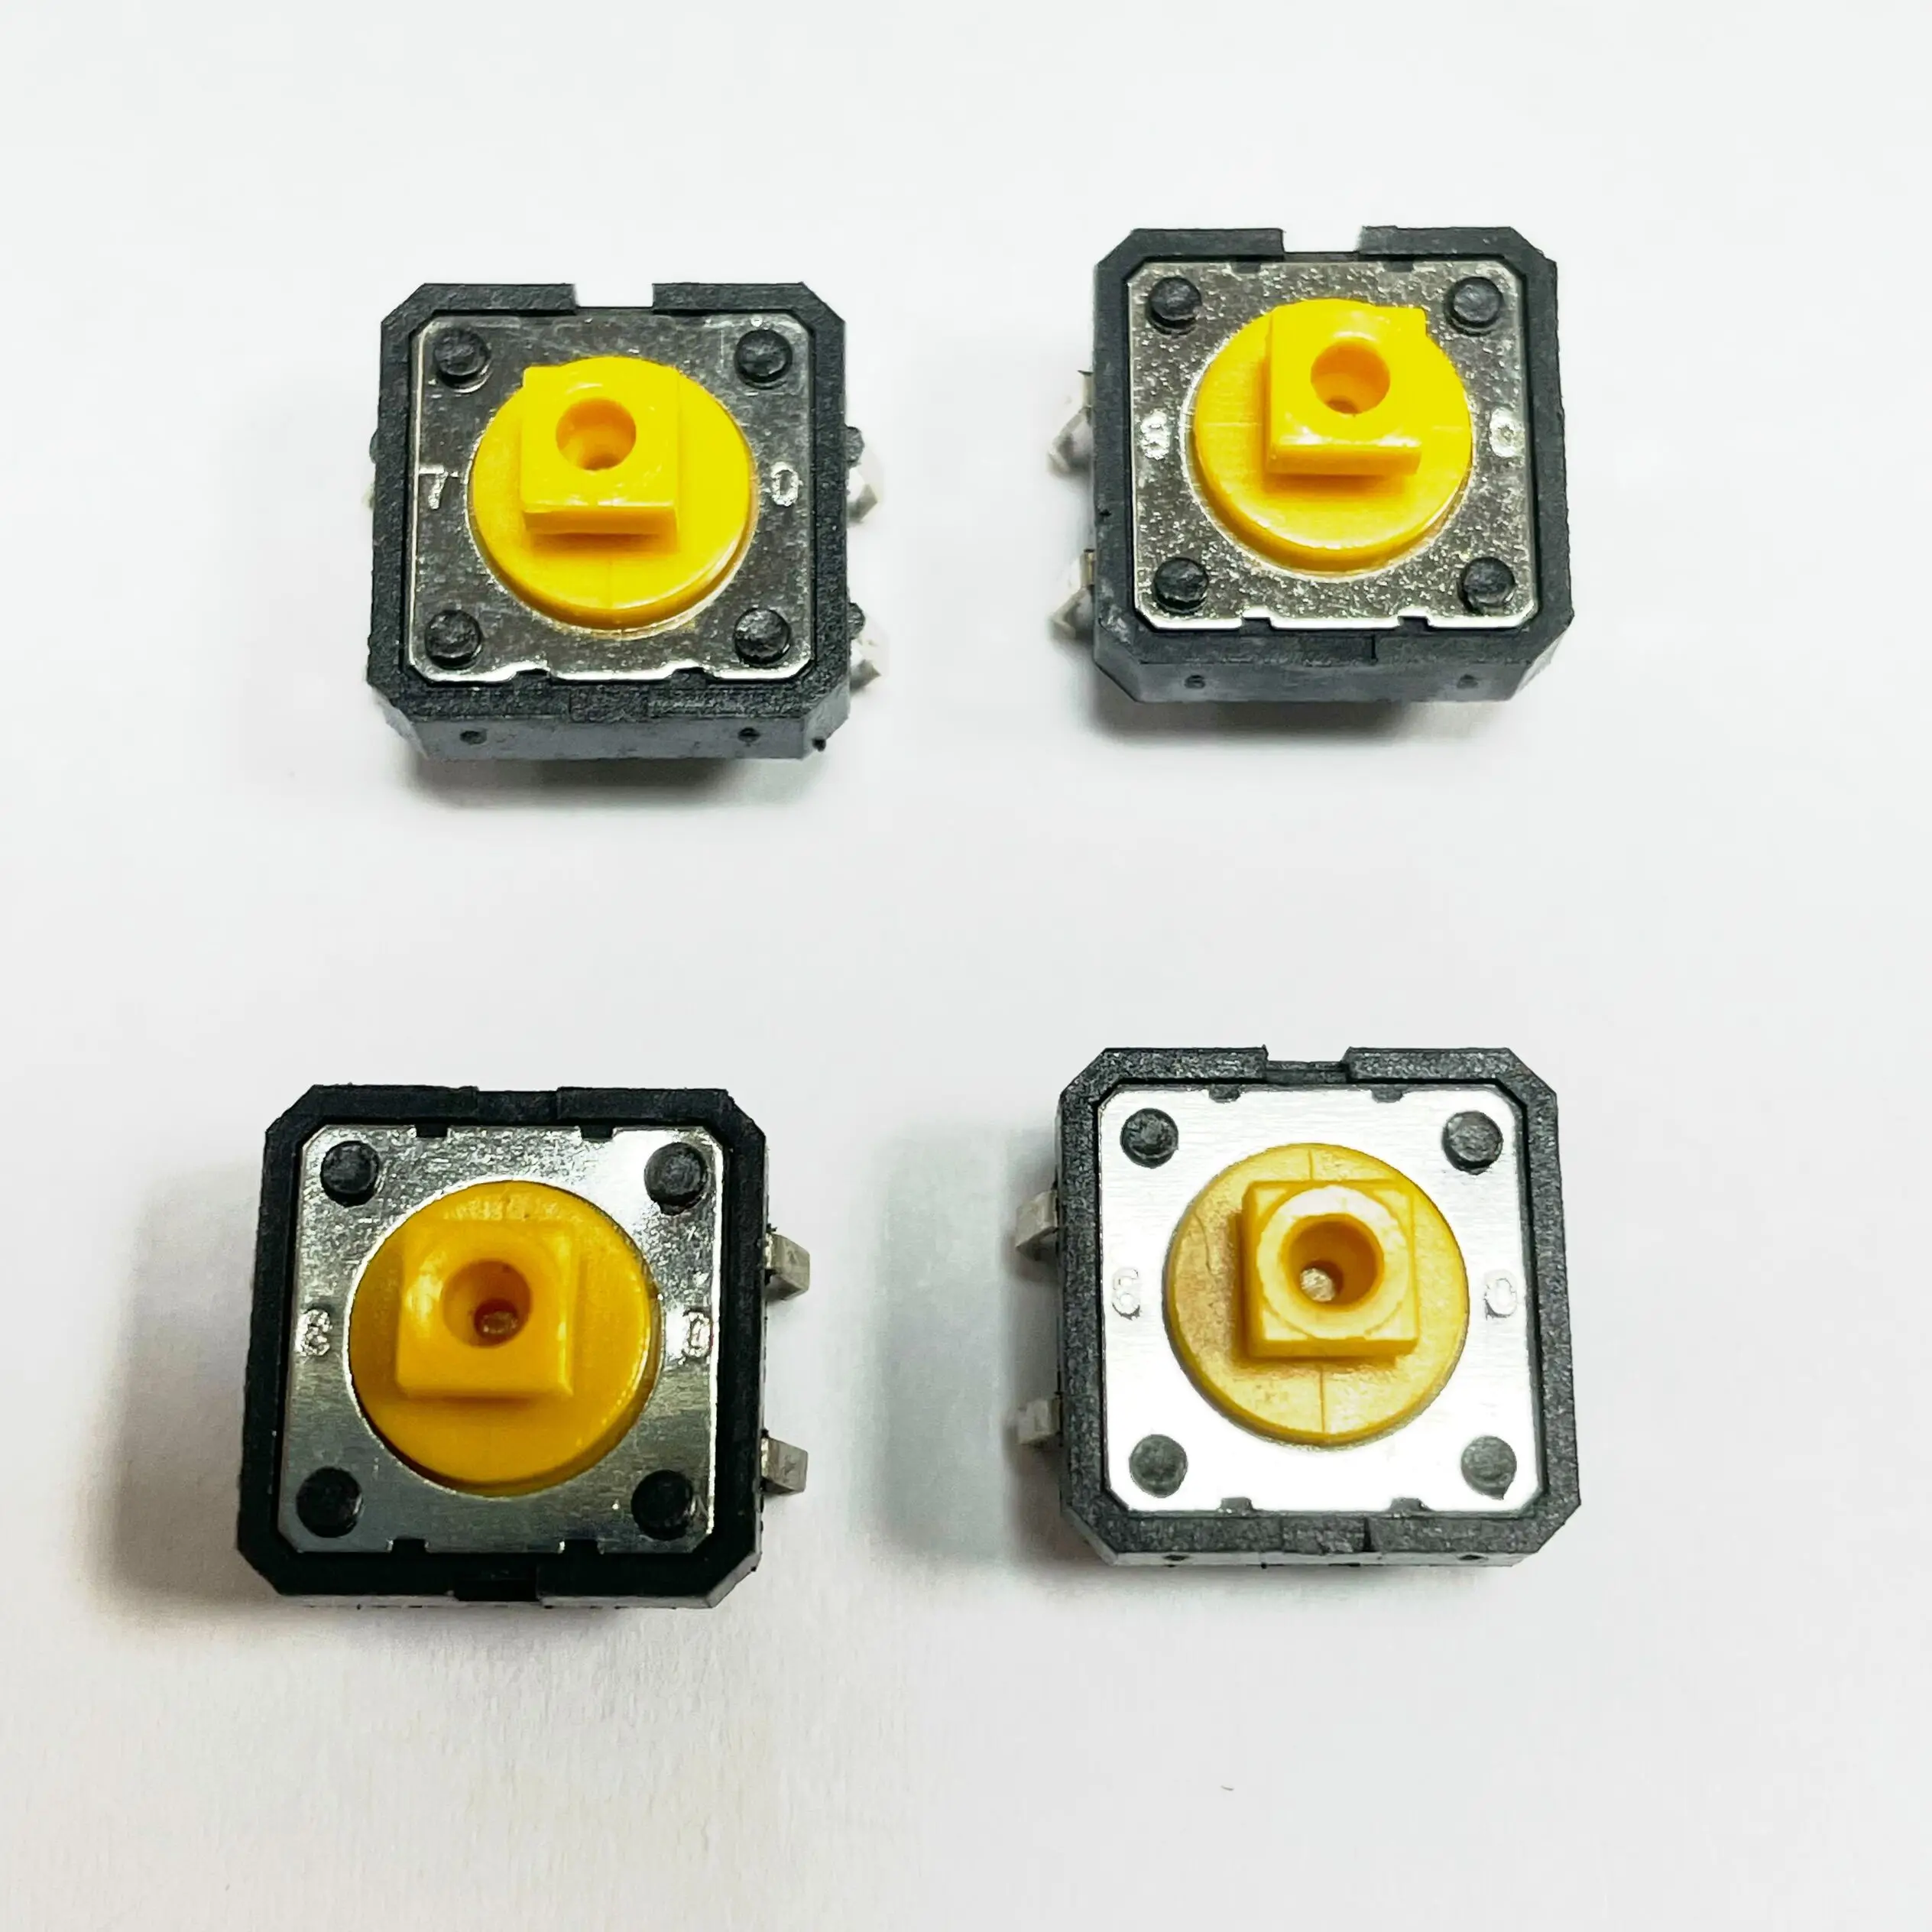 

5PCS/LOT B3F-4055 12x12x7.3 mm Tactile Switches Yellow Square Push Button Tact Switch 12*12*7.3 mm Micro switch